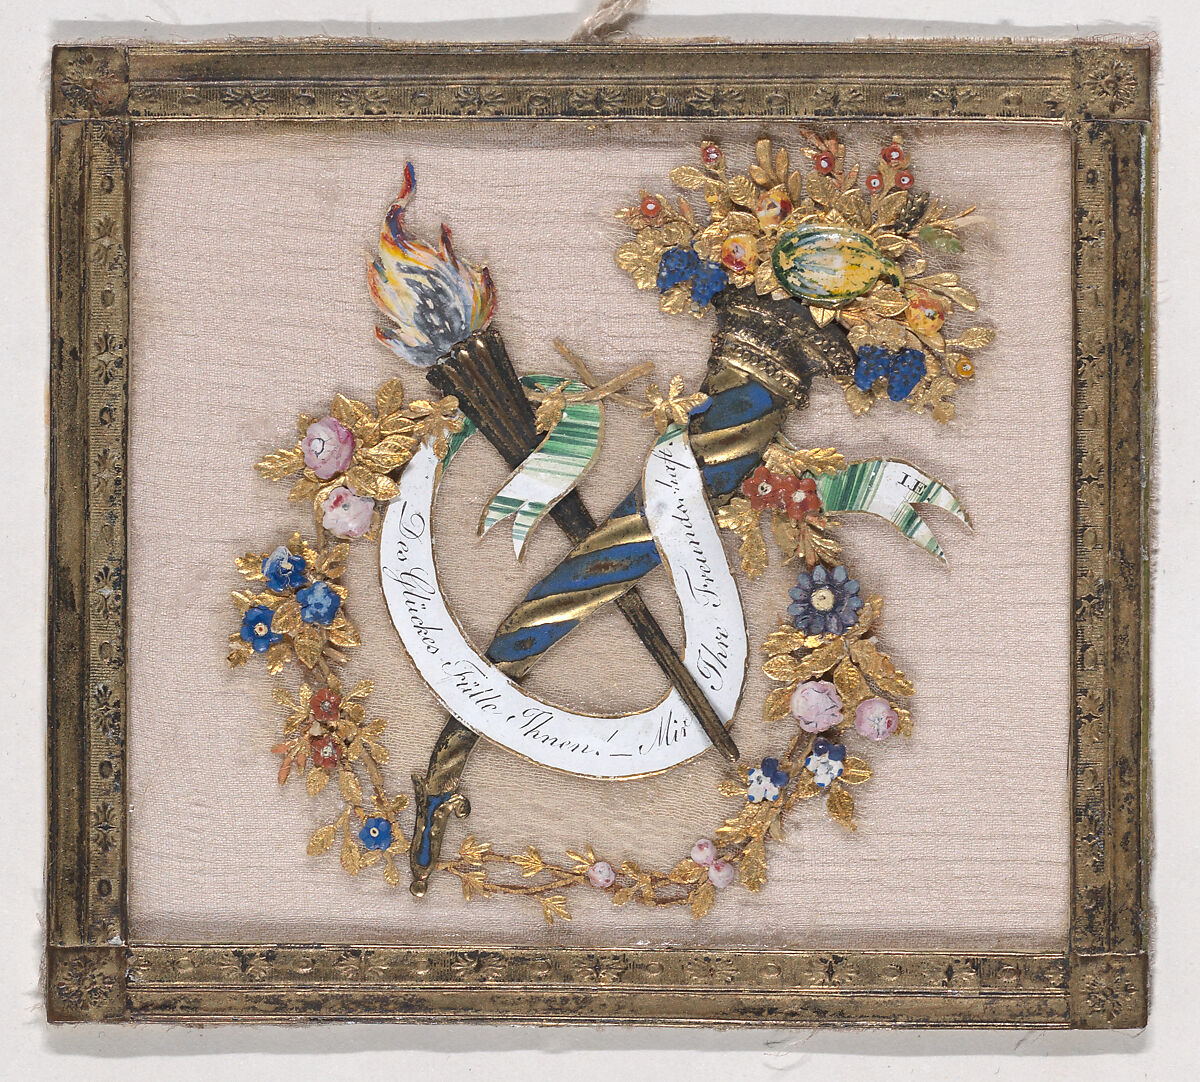 Greeting Card, Johannes Endletzberger (Austrian, 1782–1850), Gouache, metallic paint, metallic foil, and embossed and punched paper on silk 